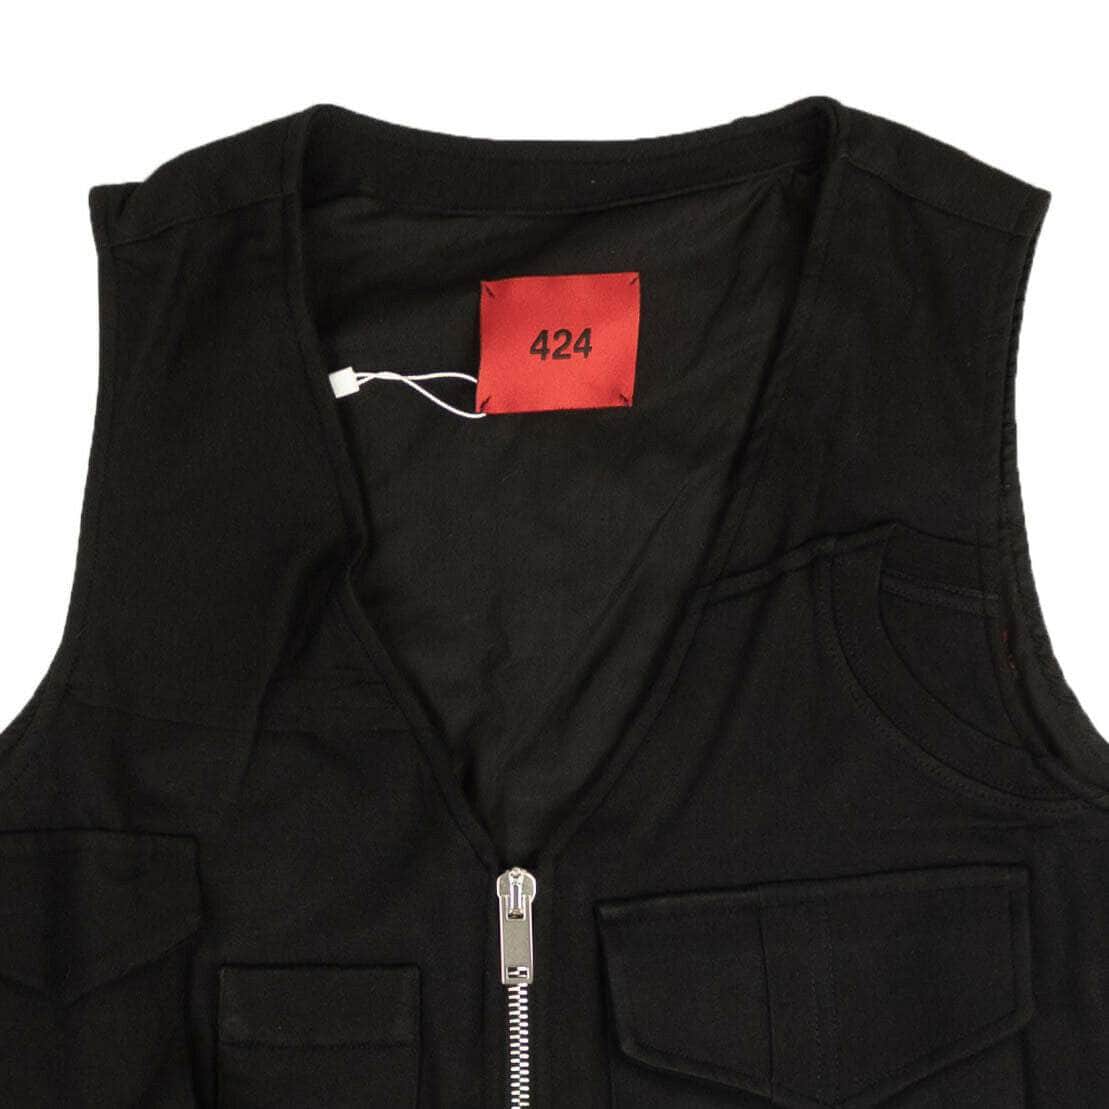 424 ON FAIRFAX 424-on-fairfax, 500-750, channelenable-all, chicmi, couponcollection, gender-mens, main-clothing, mens-outerwear-vests, mens-shoes, size-l, size-m Black Logo Patch Outerwear Vest